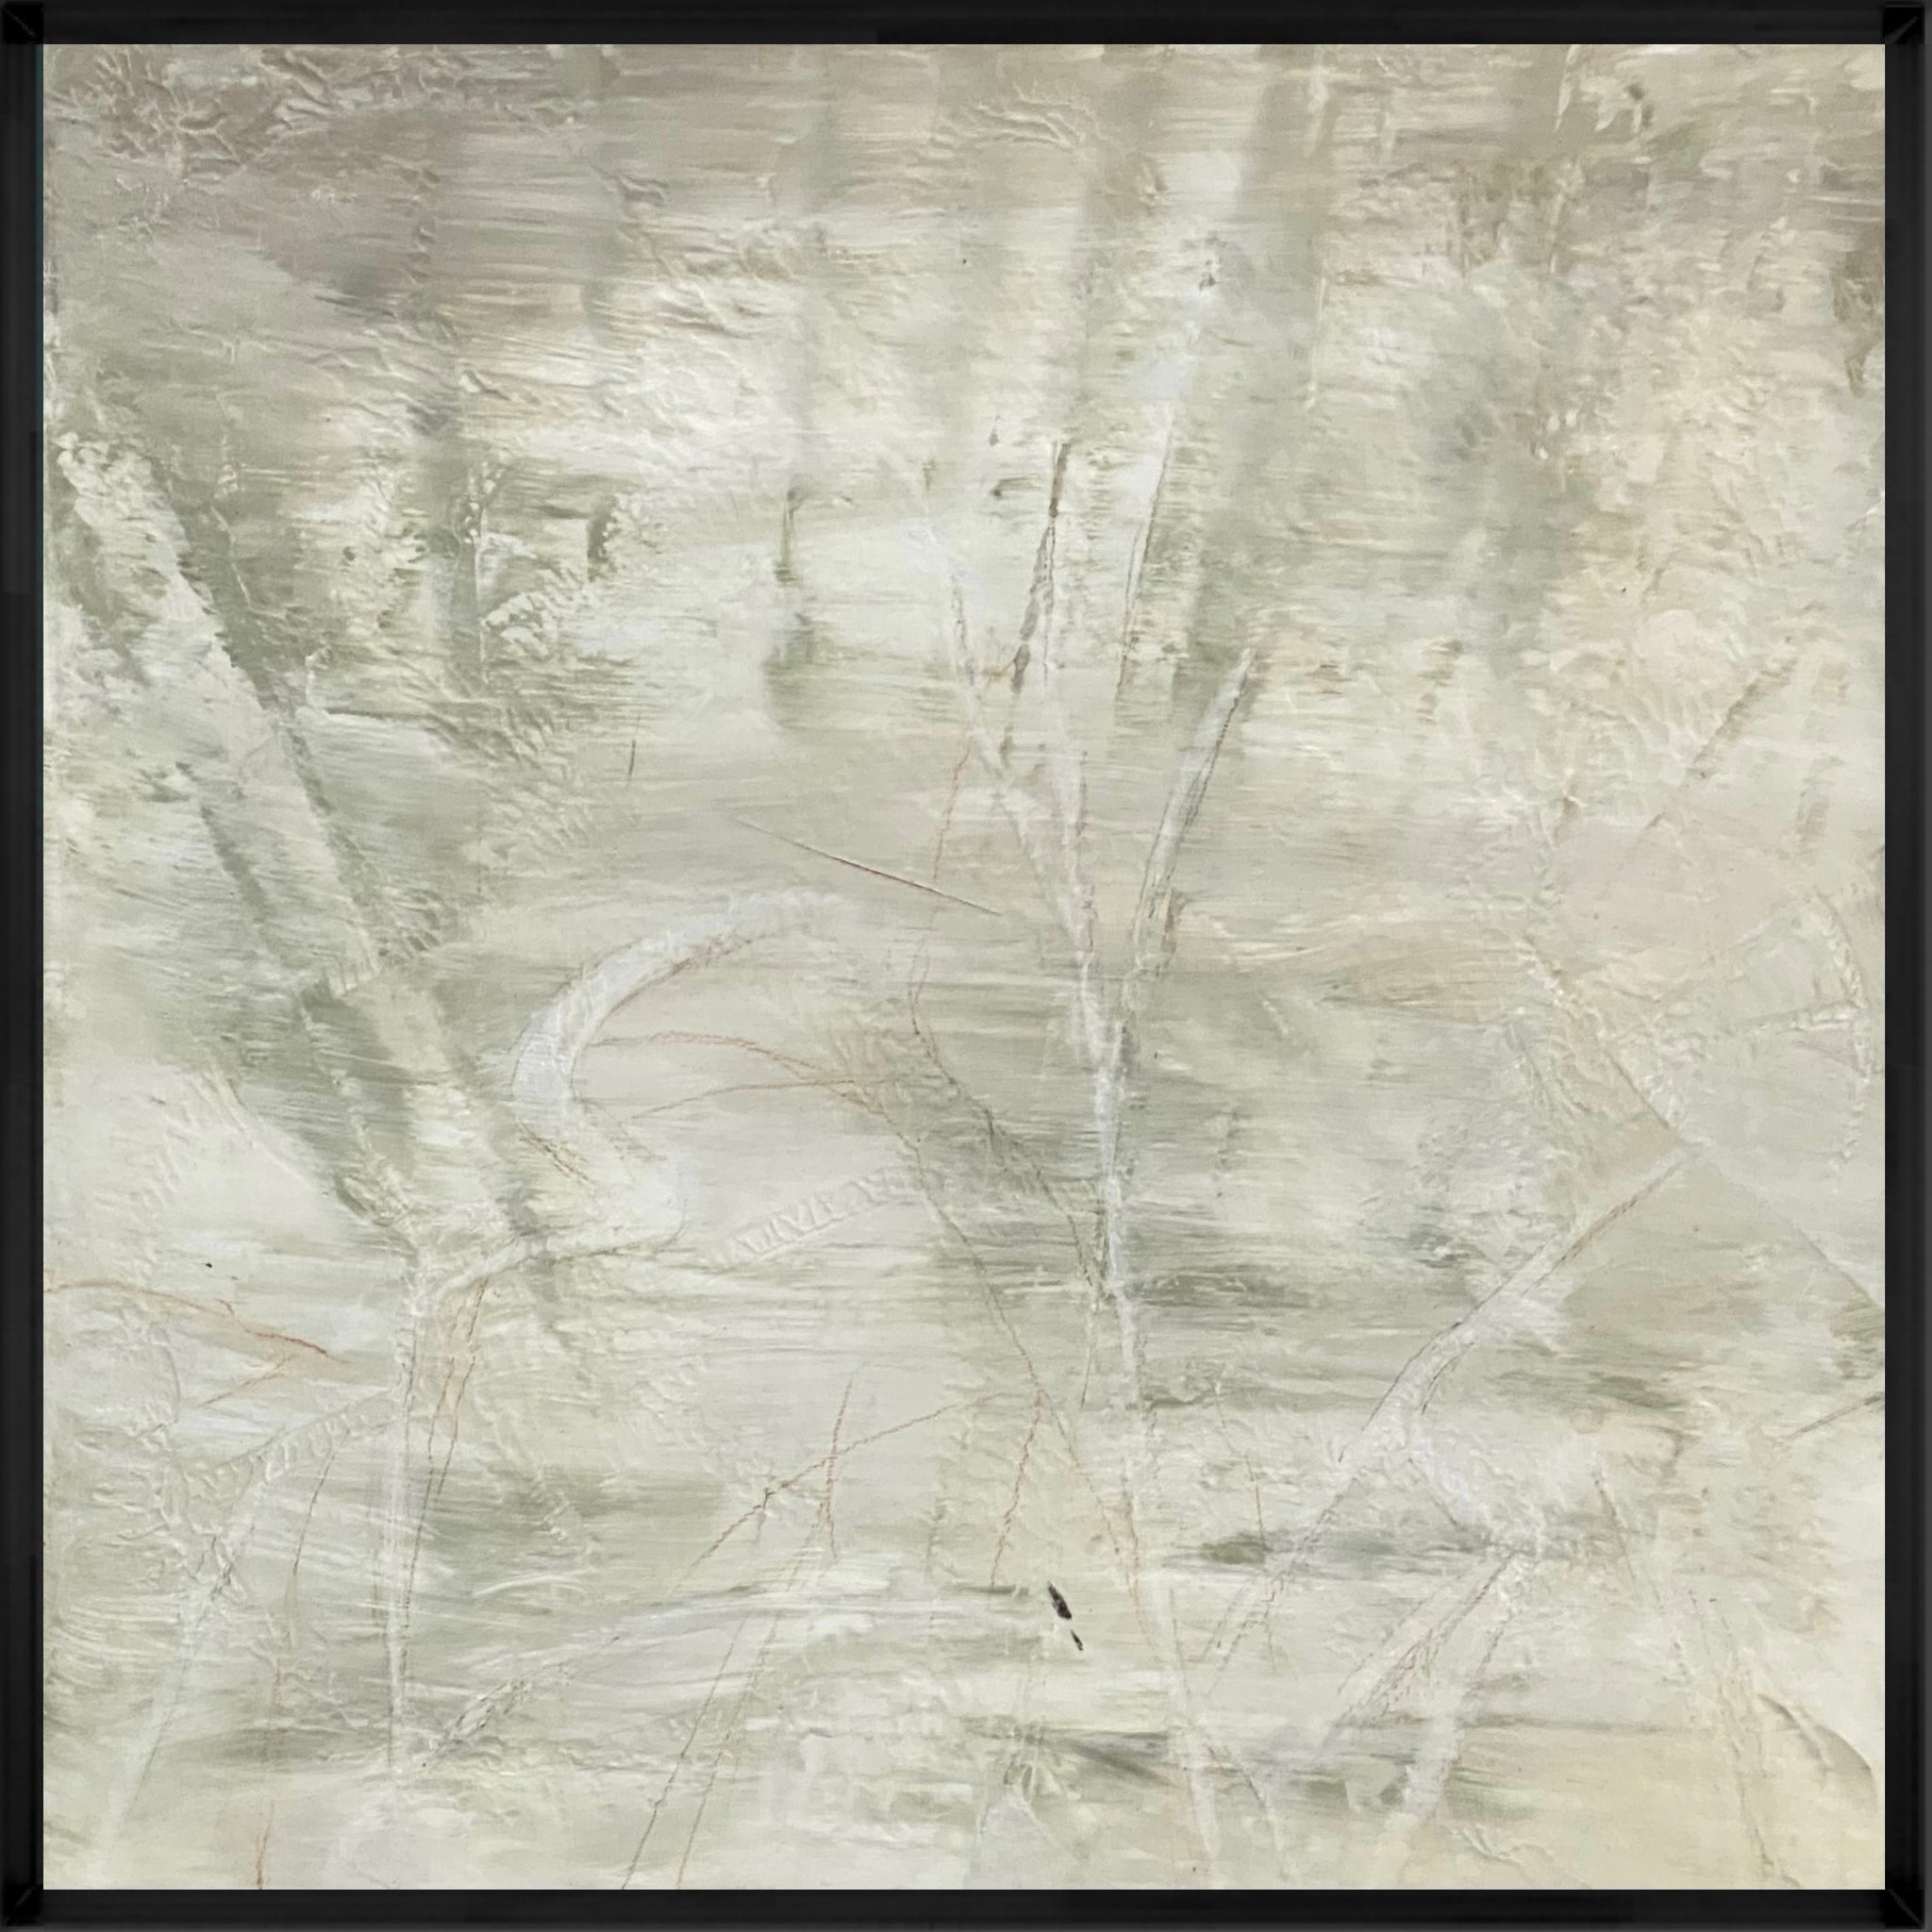 Juanita Bellavance, White on white 3, From the Chestatee River portfolio, 2021, Acrylic on canvas, 12 x 12 inches, Framed